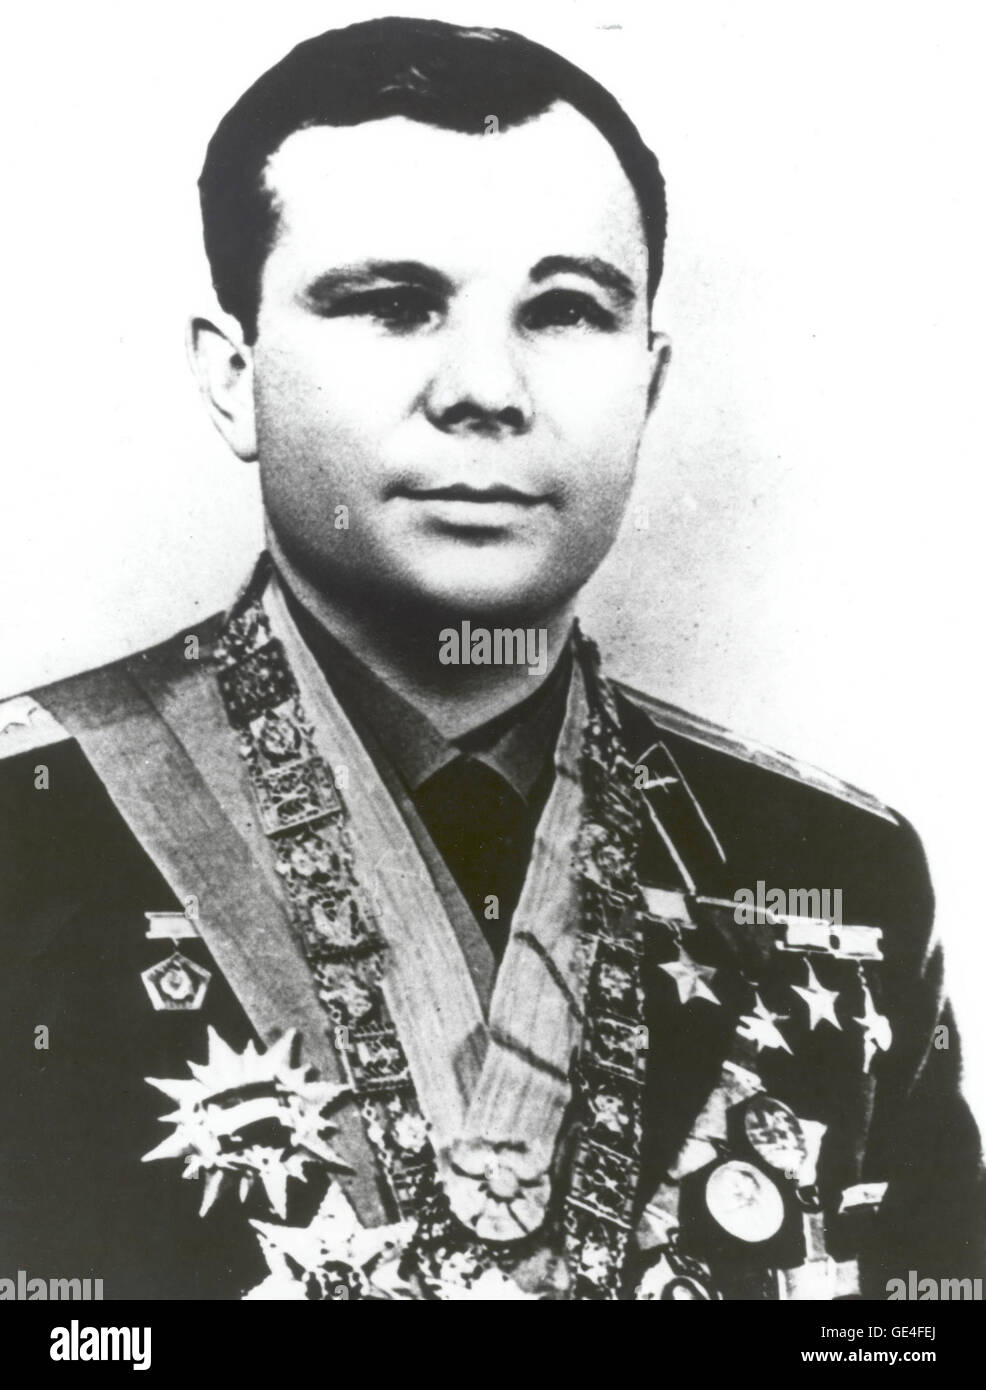 Yuri Gagarin was born on March 9, 1934 in a town outside of Moscow, Russia. After graduating from secondary school in 1949, Gagarin went to several technical schools before joining the Orenburg Higher Air Force School in 1955. He began his cosmonaut training in 1960, along with 19 other candidates. On April 12, 1961 at 9:06 am Gagarin lifted off in the Vostok 1 spacecraft and after a 108-minute flight of extended microgravity, he parachuted safely to the ground in the Saratov region of the USSR. As the first human to fly in space, he successfully completed one orbit around the Earth. After his Stock Photo